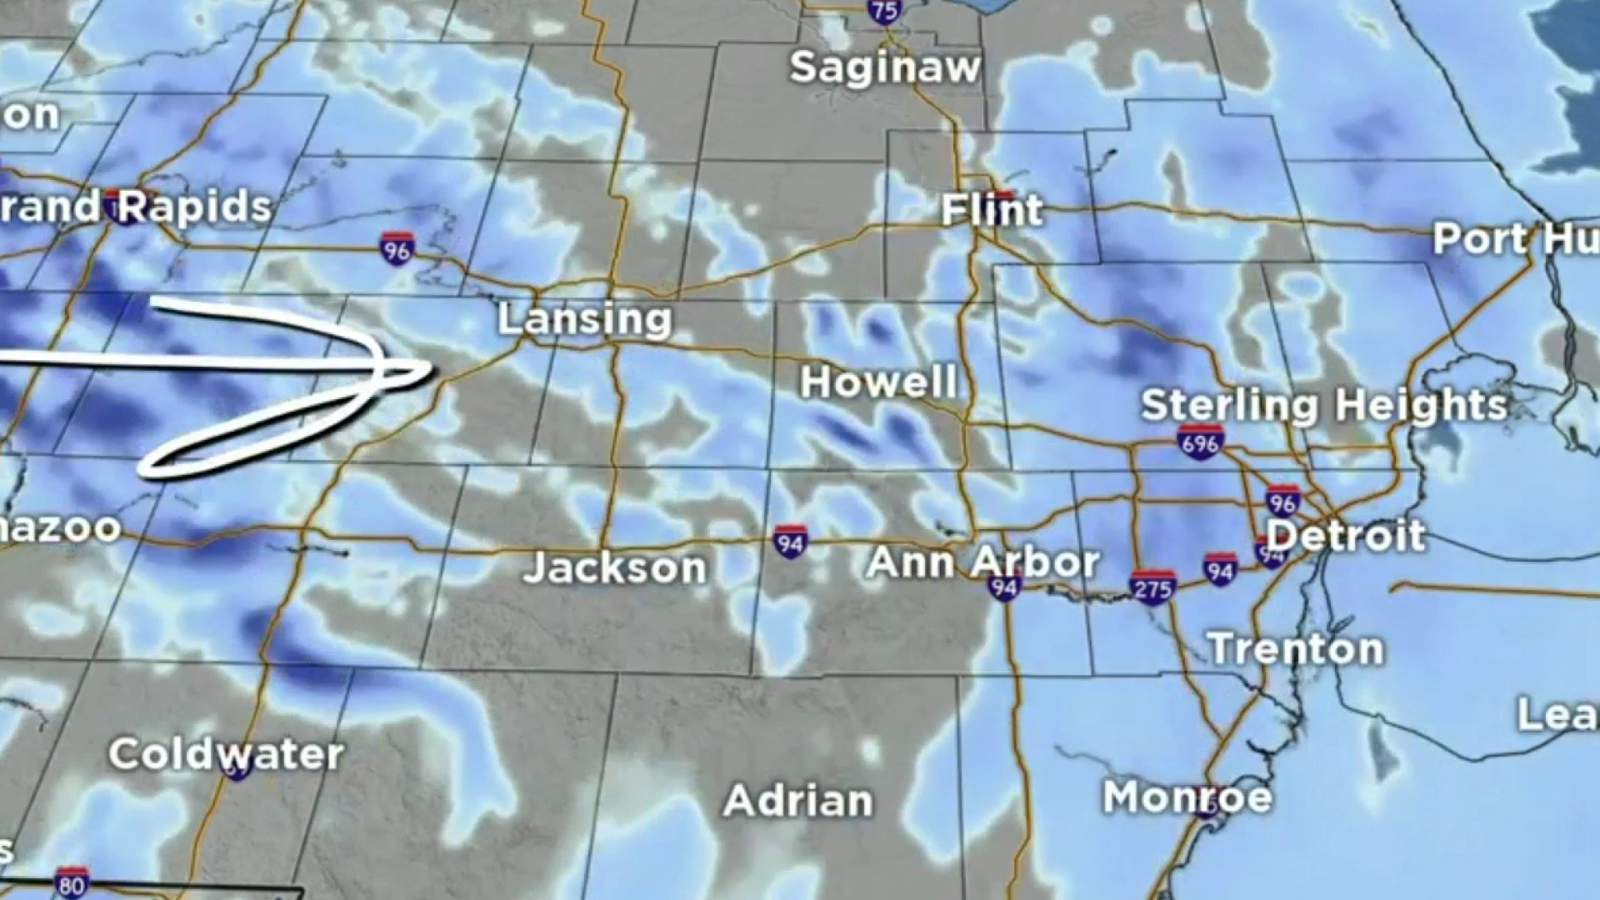 Metro Detroit weather: A White Christmas for Michiganders